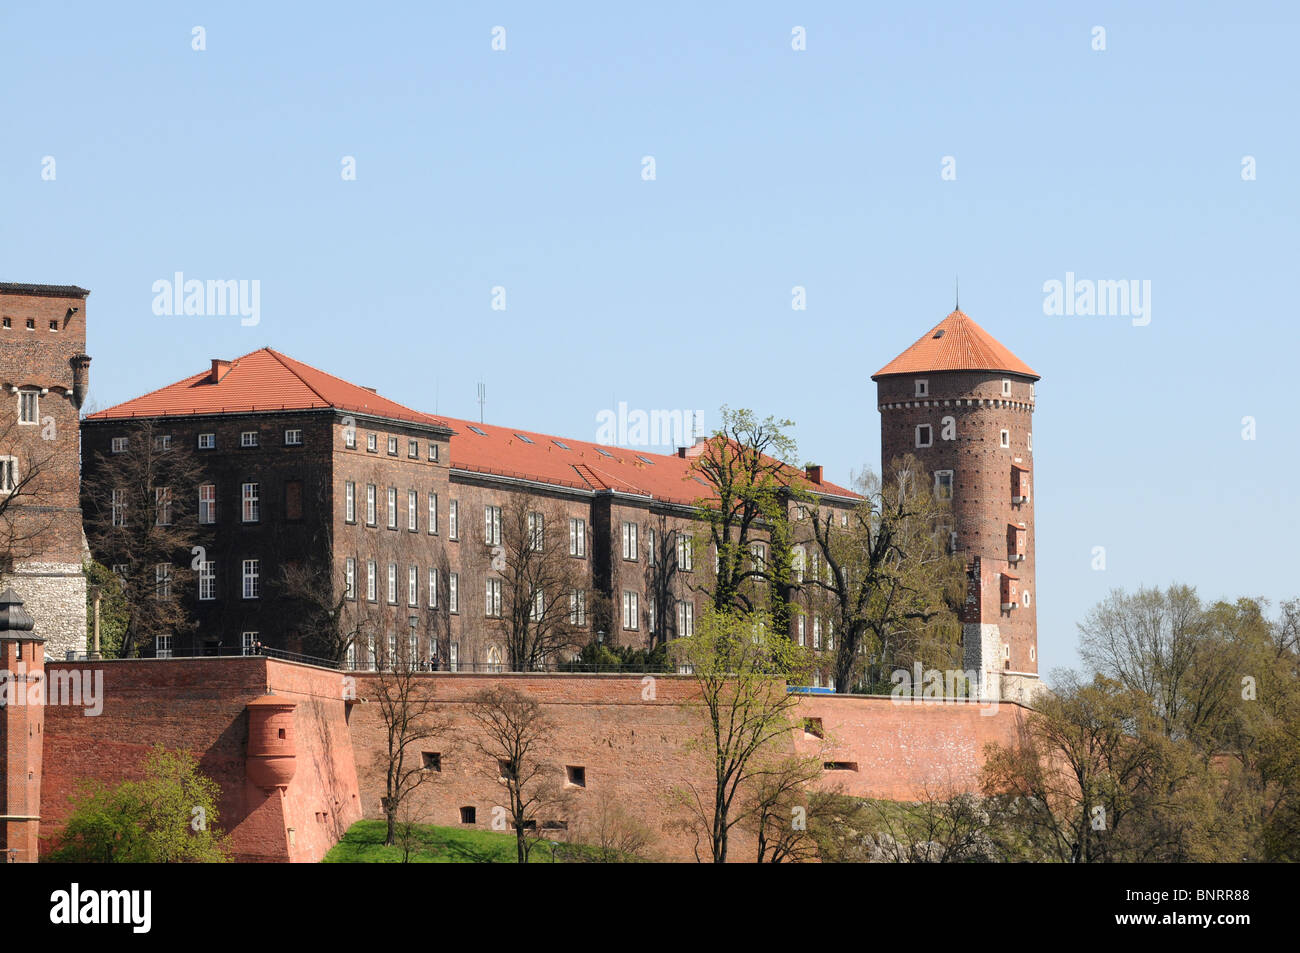 Wawel architectural complex in Cracow, Poland Stock Photo